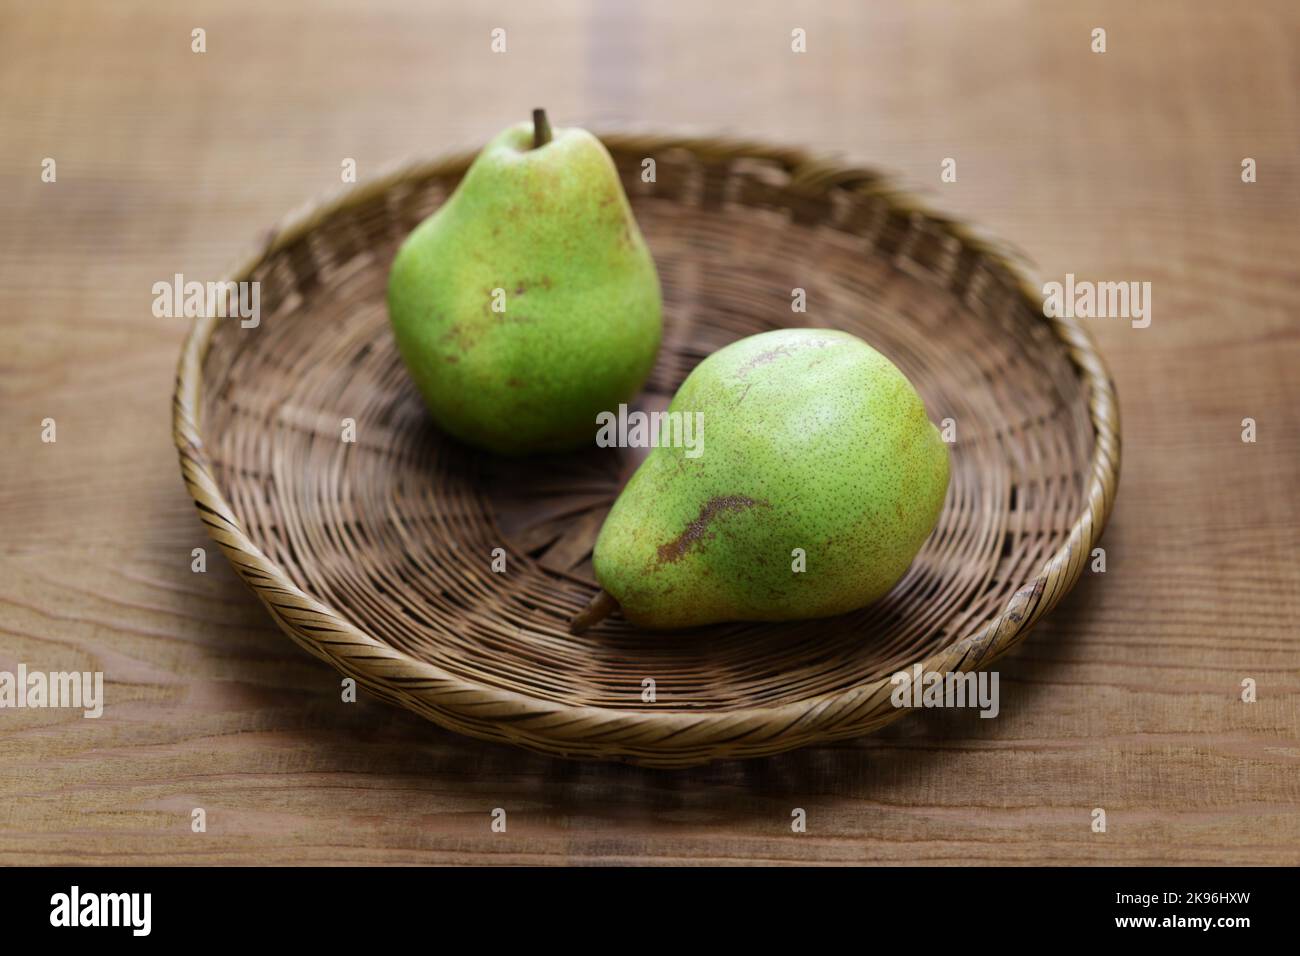 The doyenne du comice is a French pear variety first cultivated in the 19th century. Stock Photo